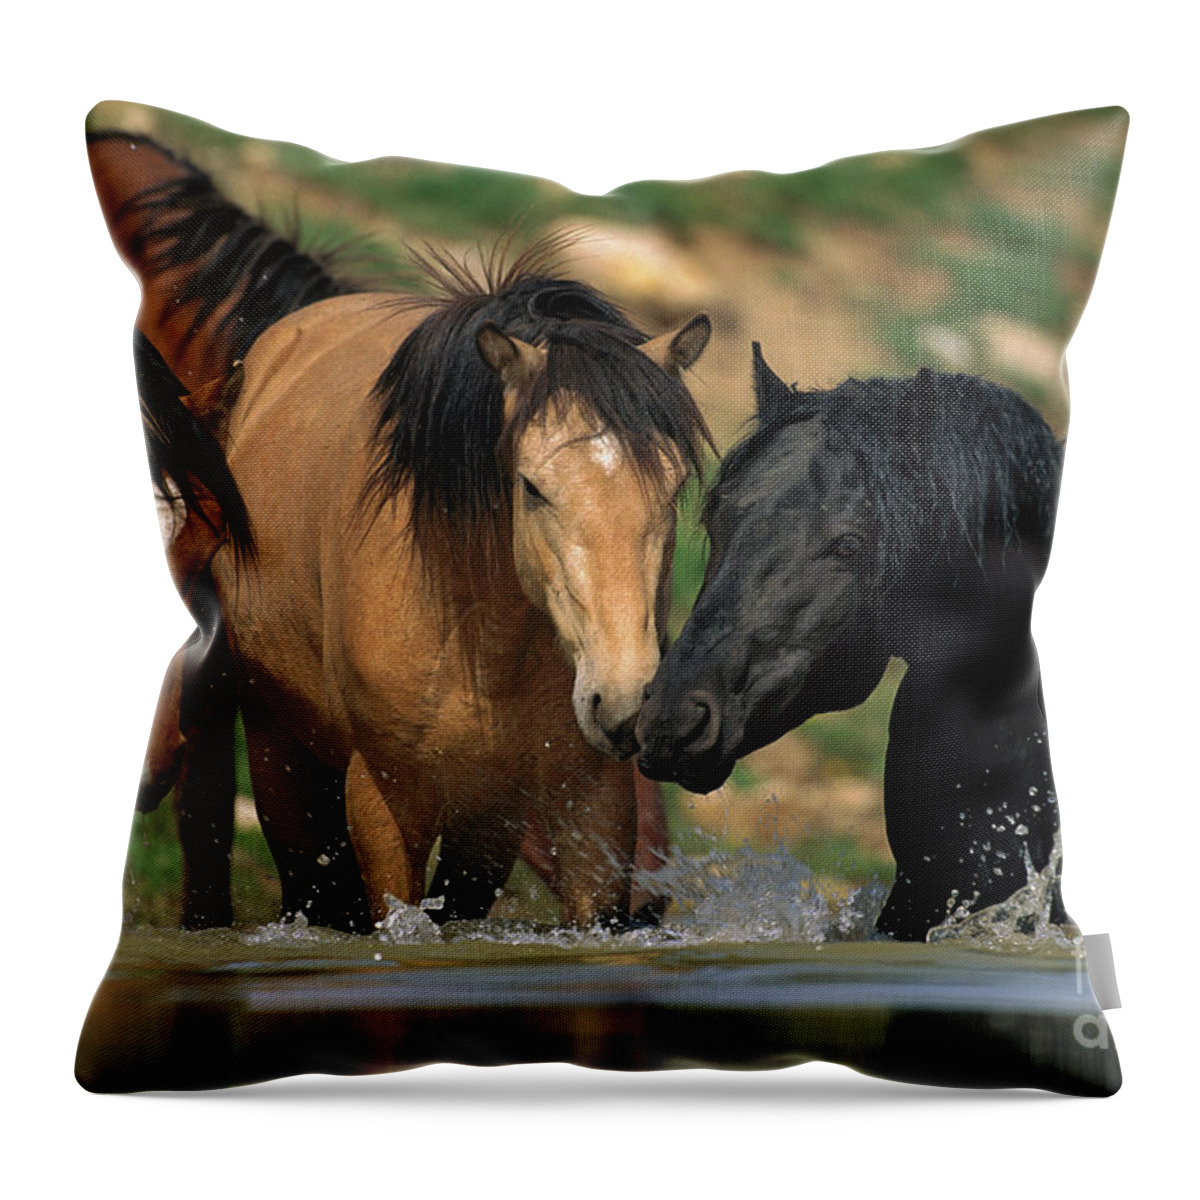 00340043 Throw Pillow featuring the photograph Mustangs At Waterhole In Summer by Yva Momatiuk and John Eastcott